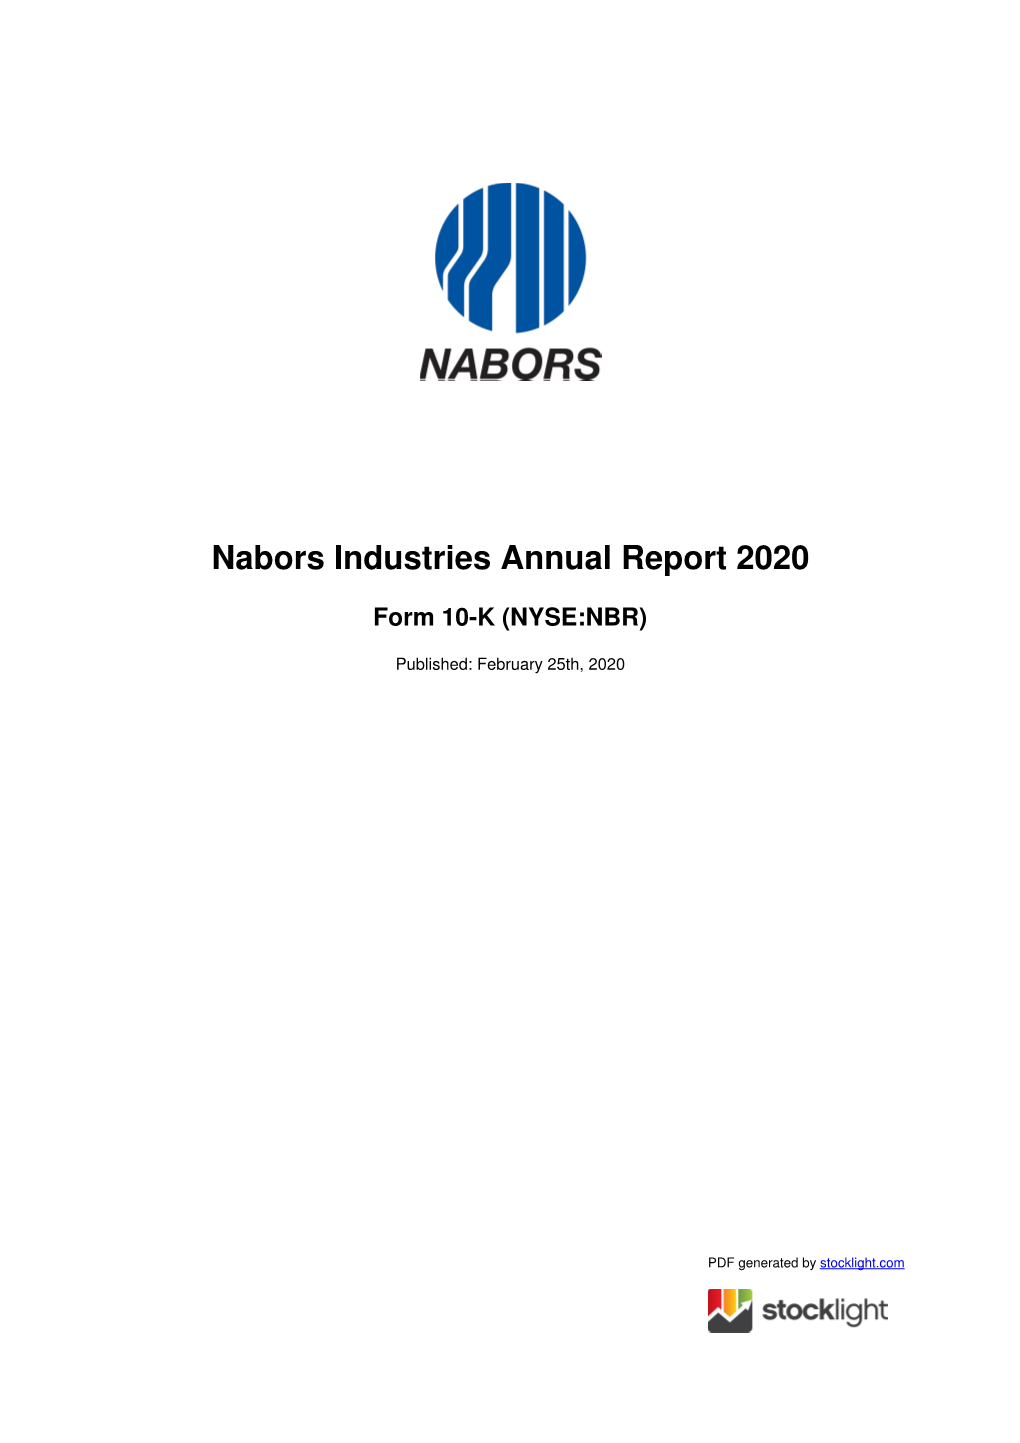 Nabors Industries Annual Report 2020